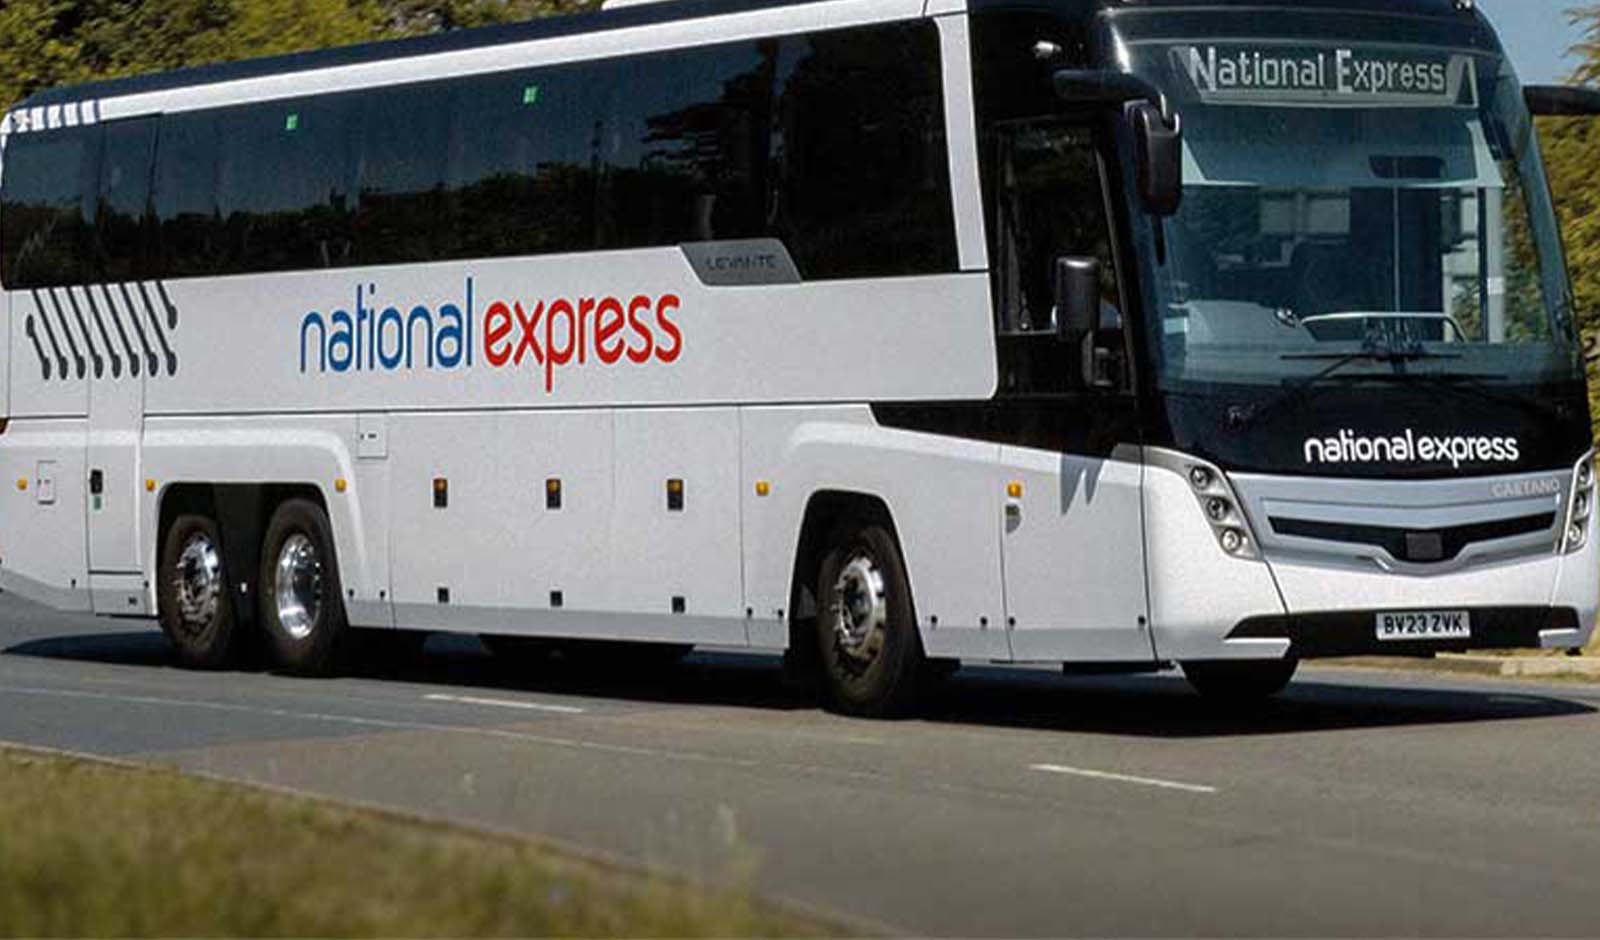 Coach tickets from London to Nottingham From £6.90 one-way*